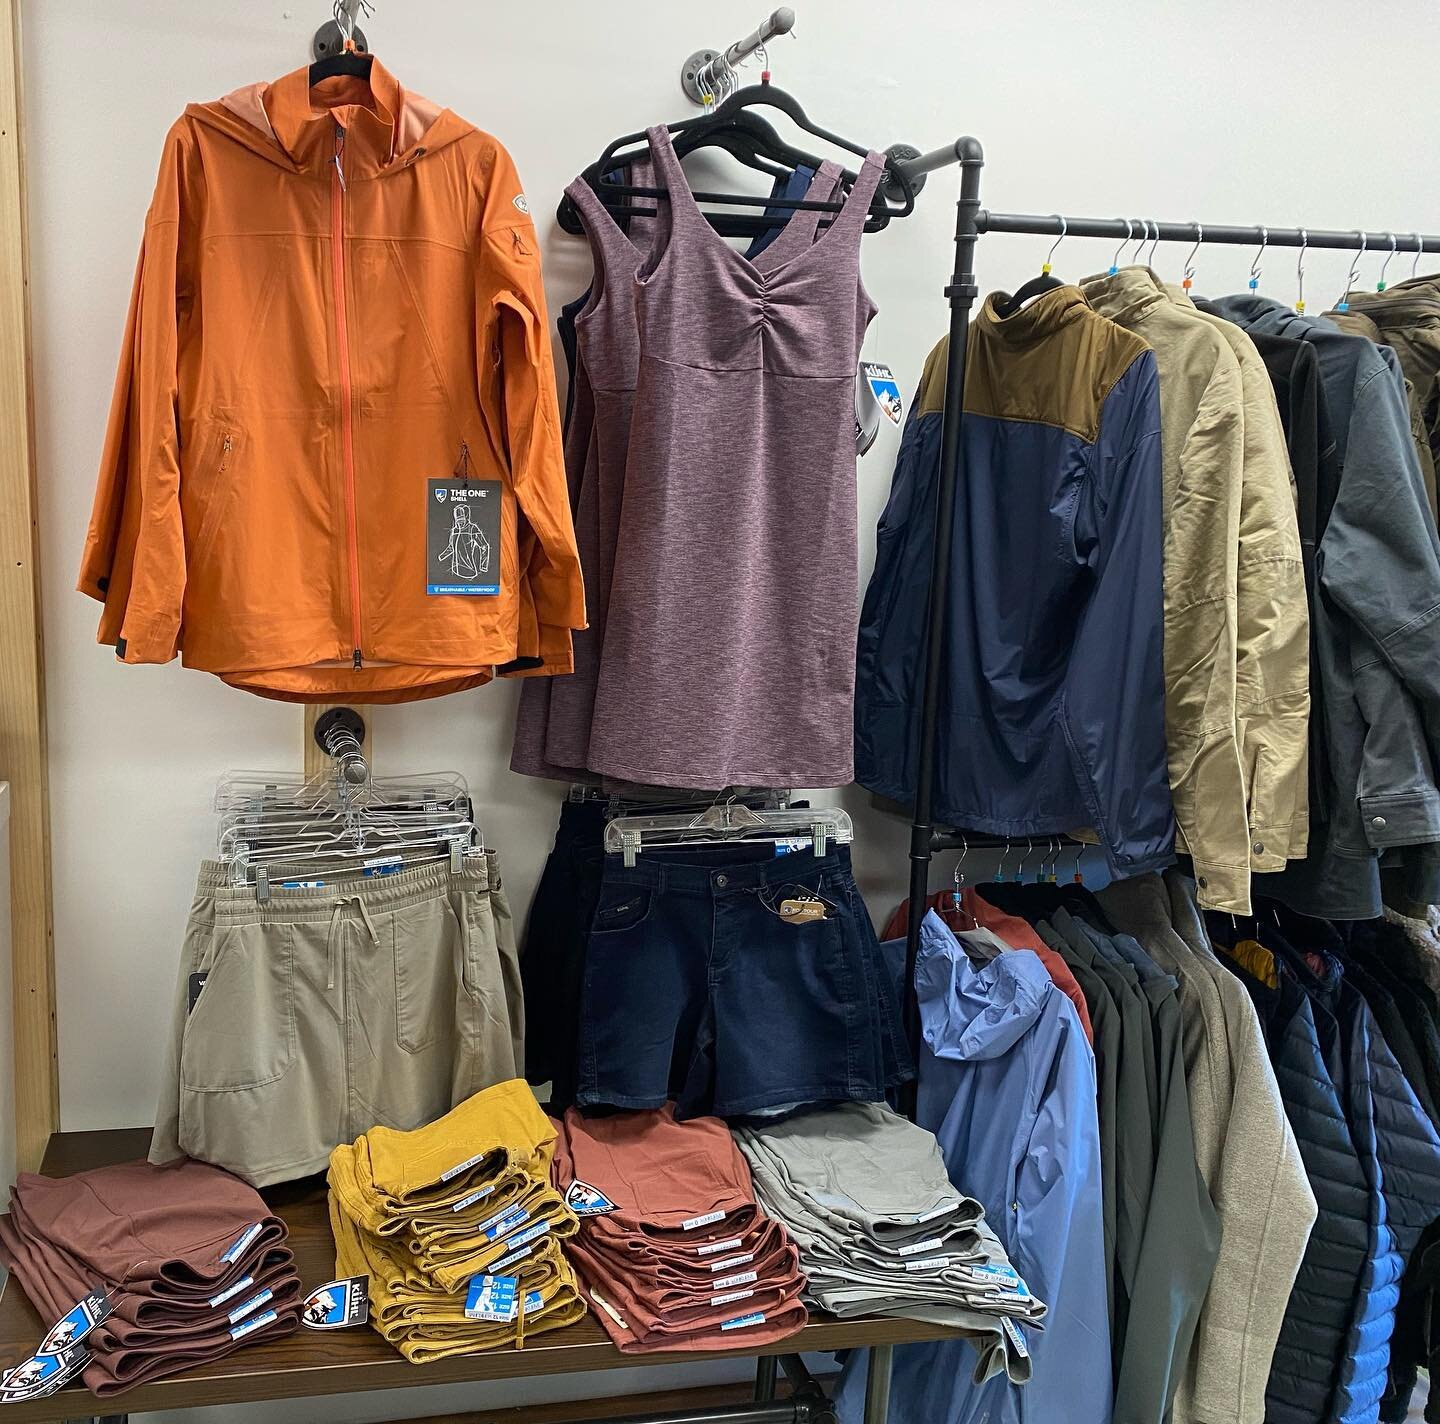 Just in! Shorts and SKORTS, polos shirts and roll-up/zip-off pants for men and women! Not to mention poles, great tees and rain layers, nalgenes and petzyls and windbreakers, oh my!!! I can&rsquo;t even list it all. Just come shopping! 
.
All I wear 